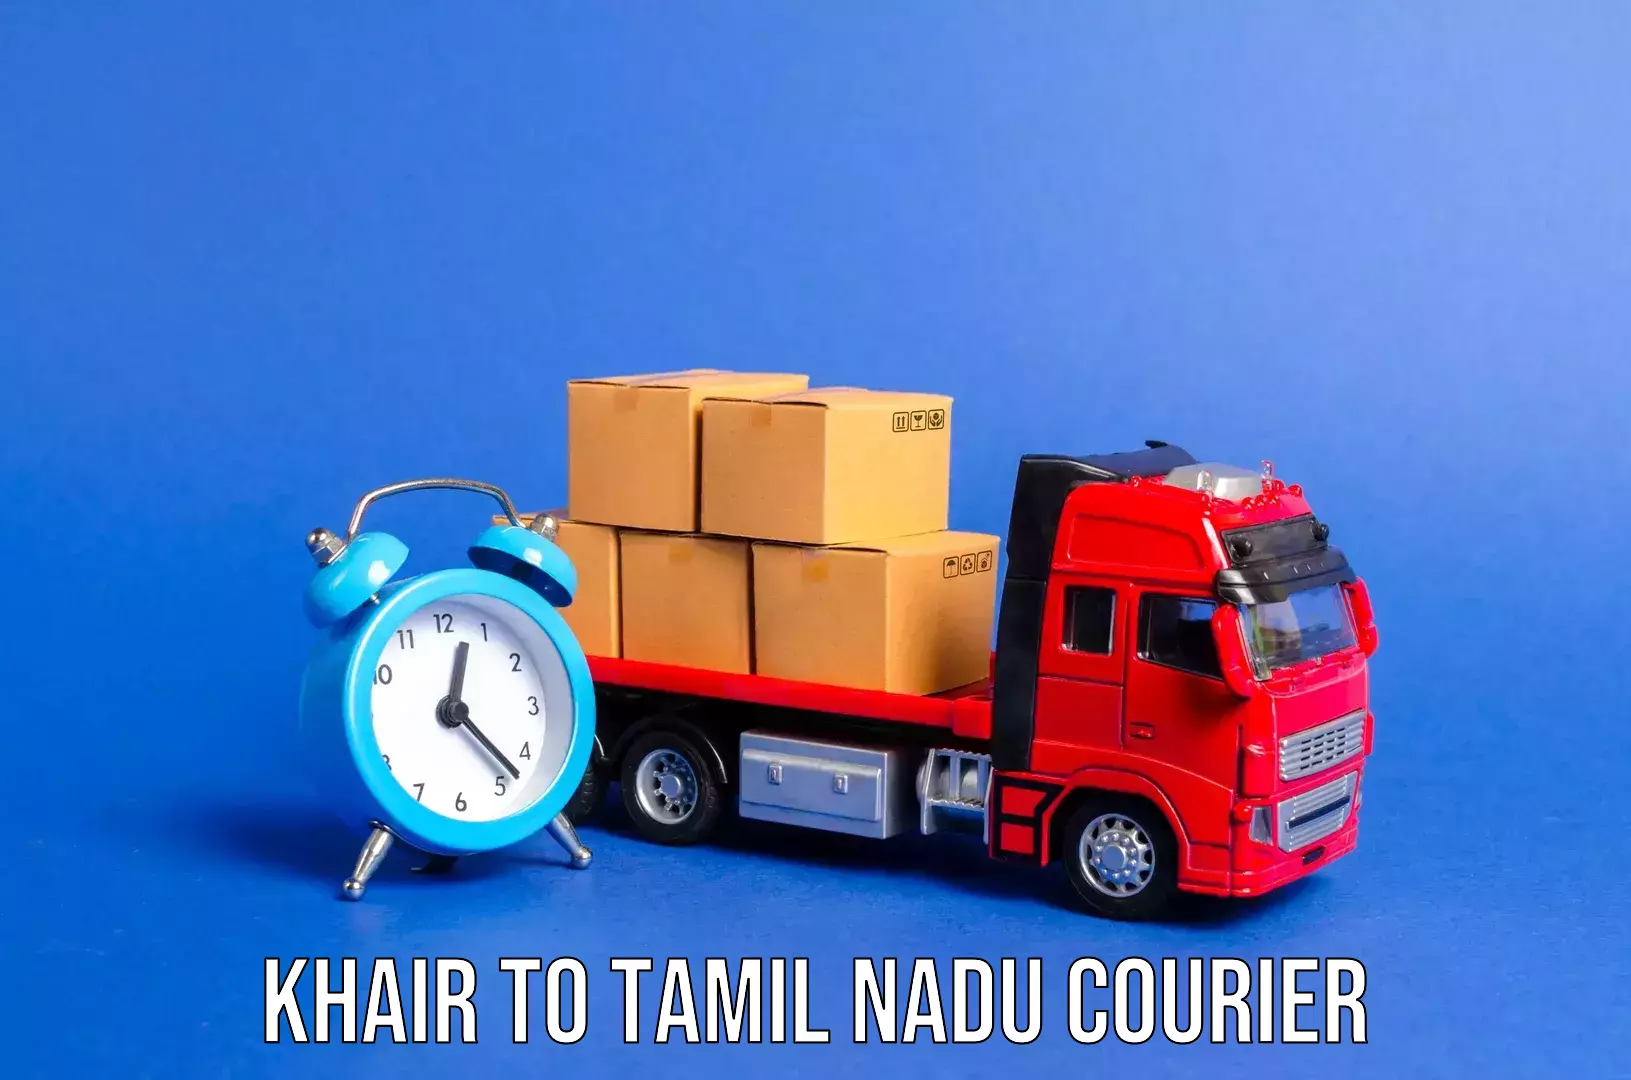 Luggage shipment tracking Khair to Sri Ramachandra Institute of Higher Education and Research Chennai